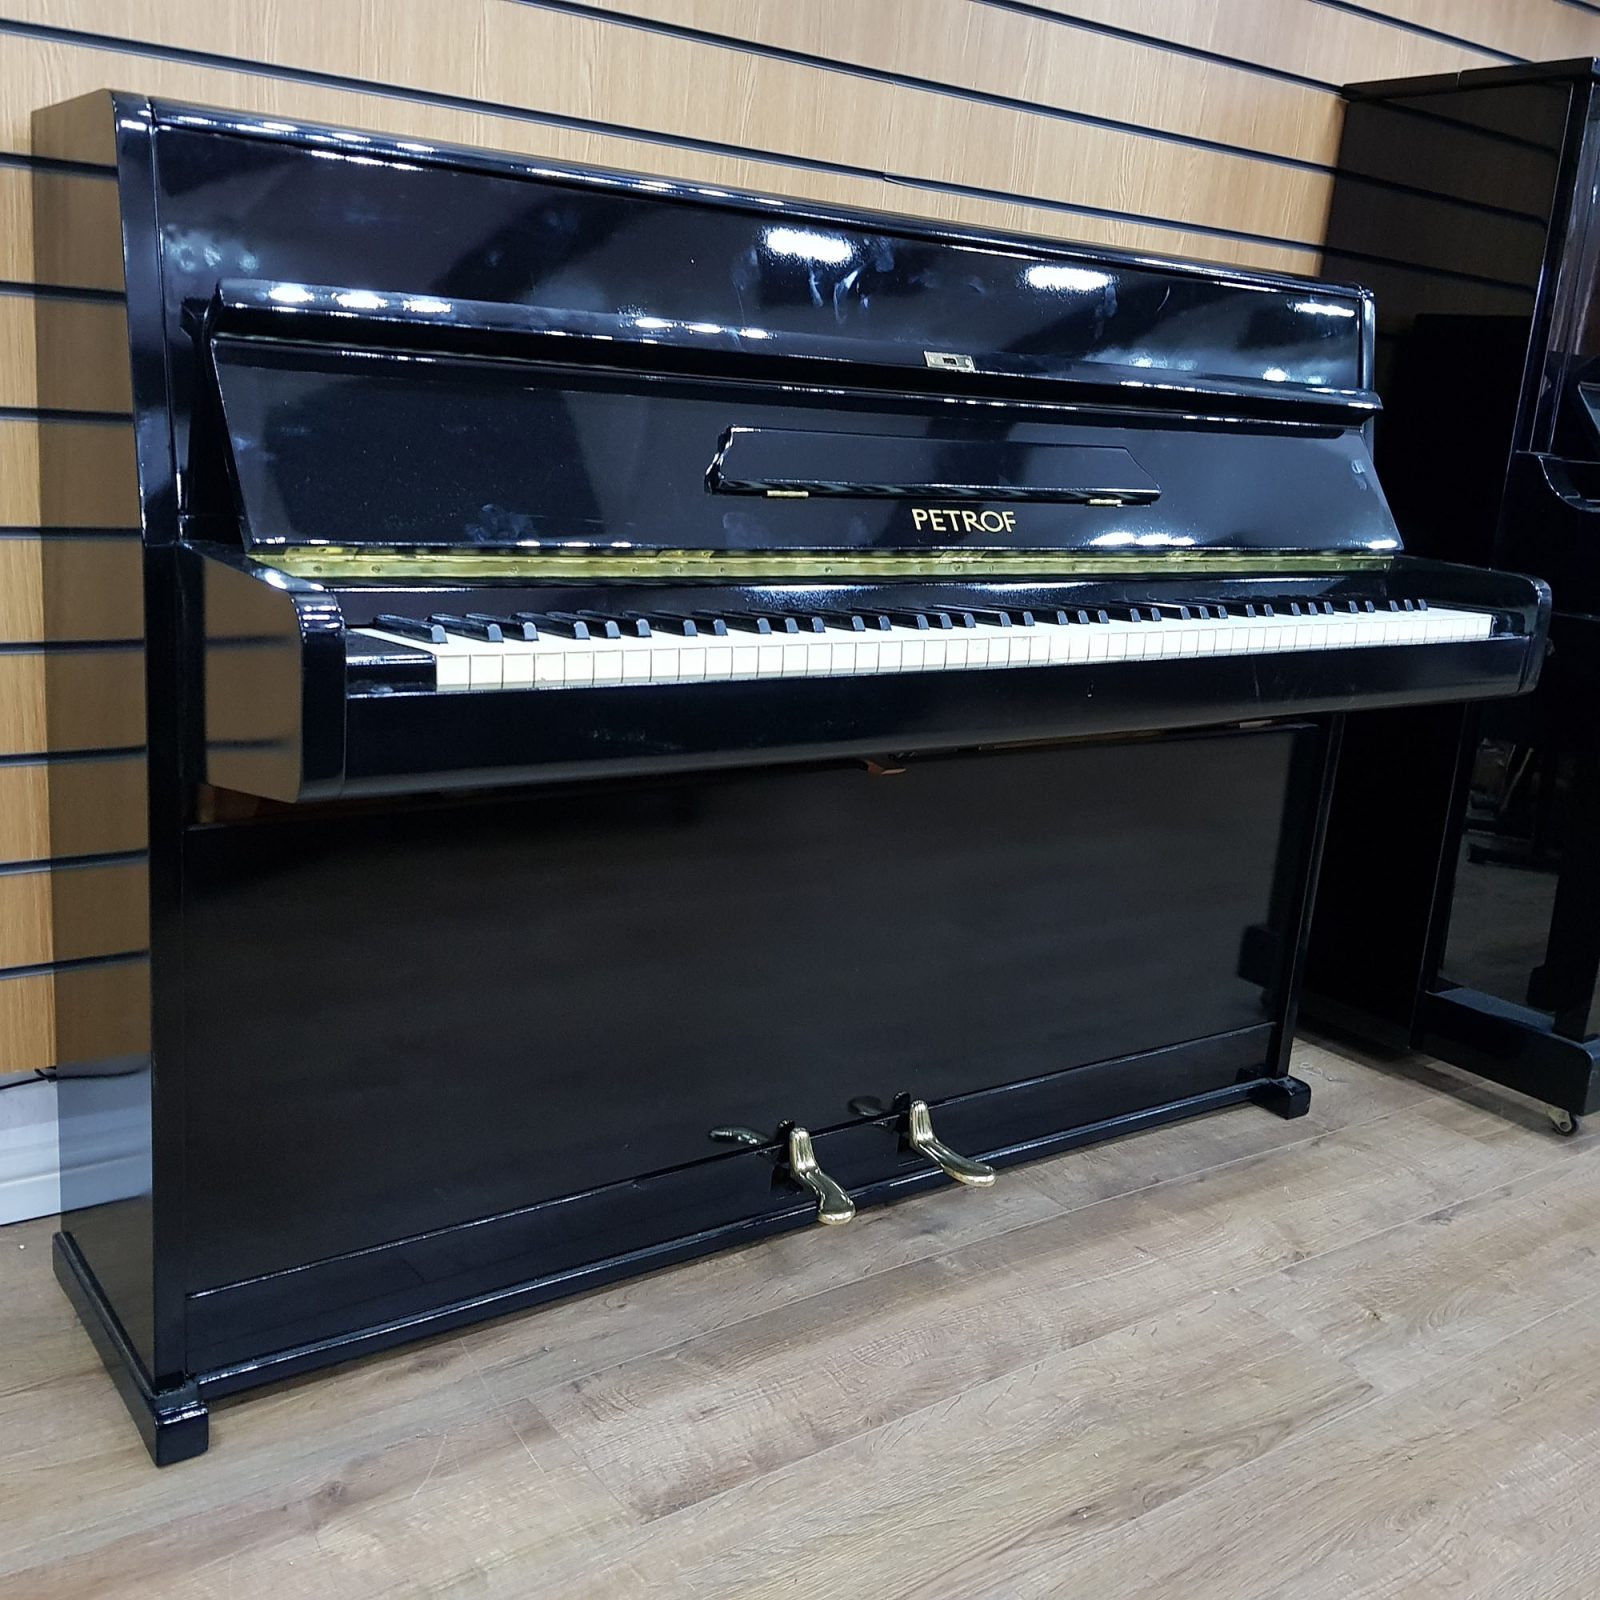 Petrof upright piano, in a black lacquered case for sale.